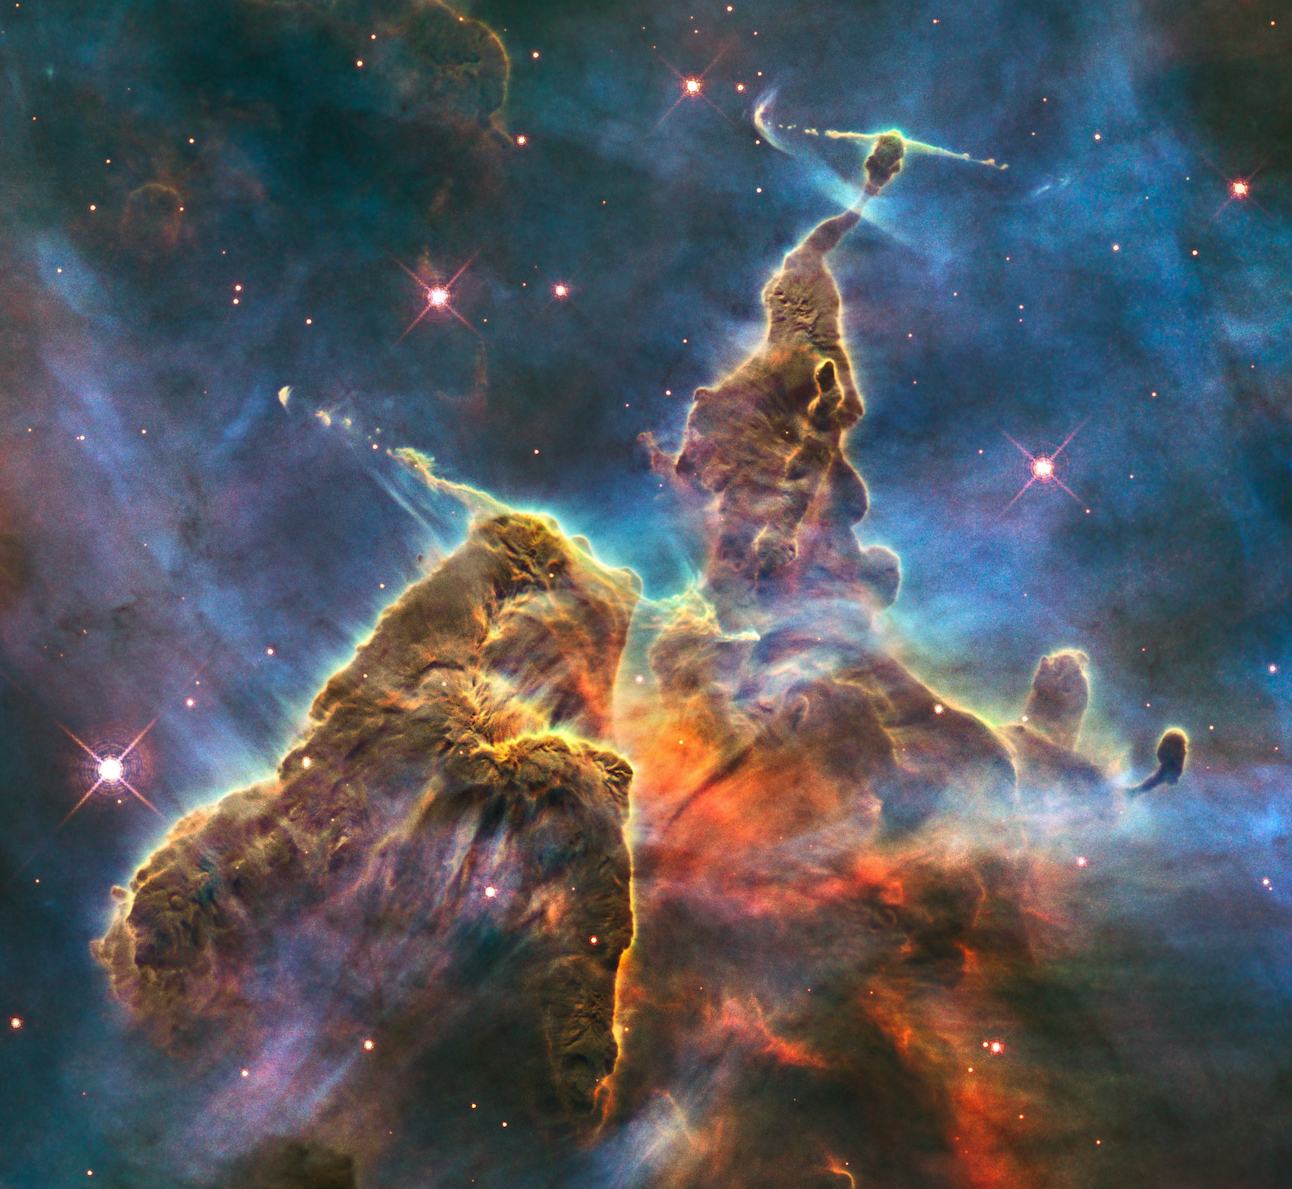 25 Spectacular Space Photos to Celebrate 25 Years of the Hubble Space Telescope